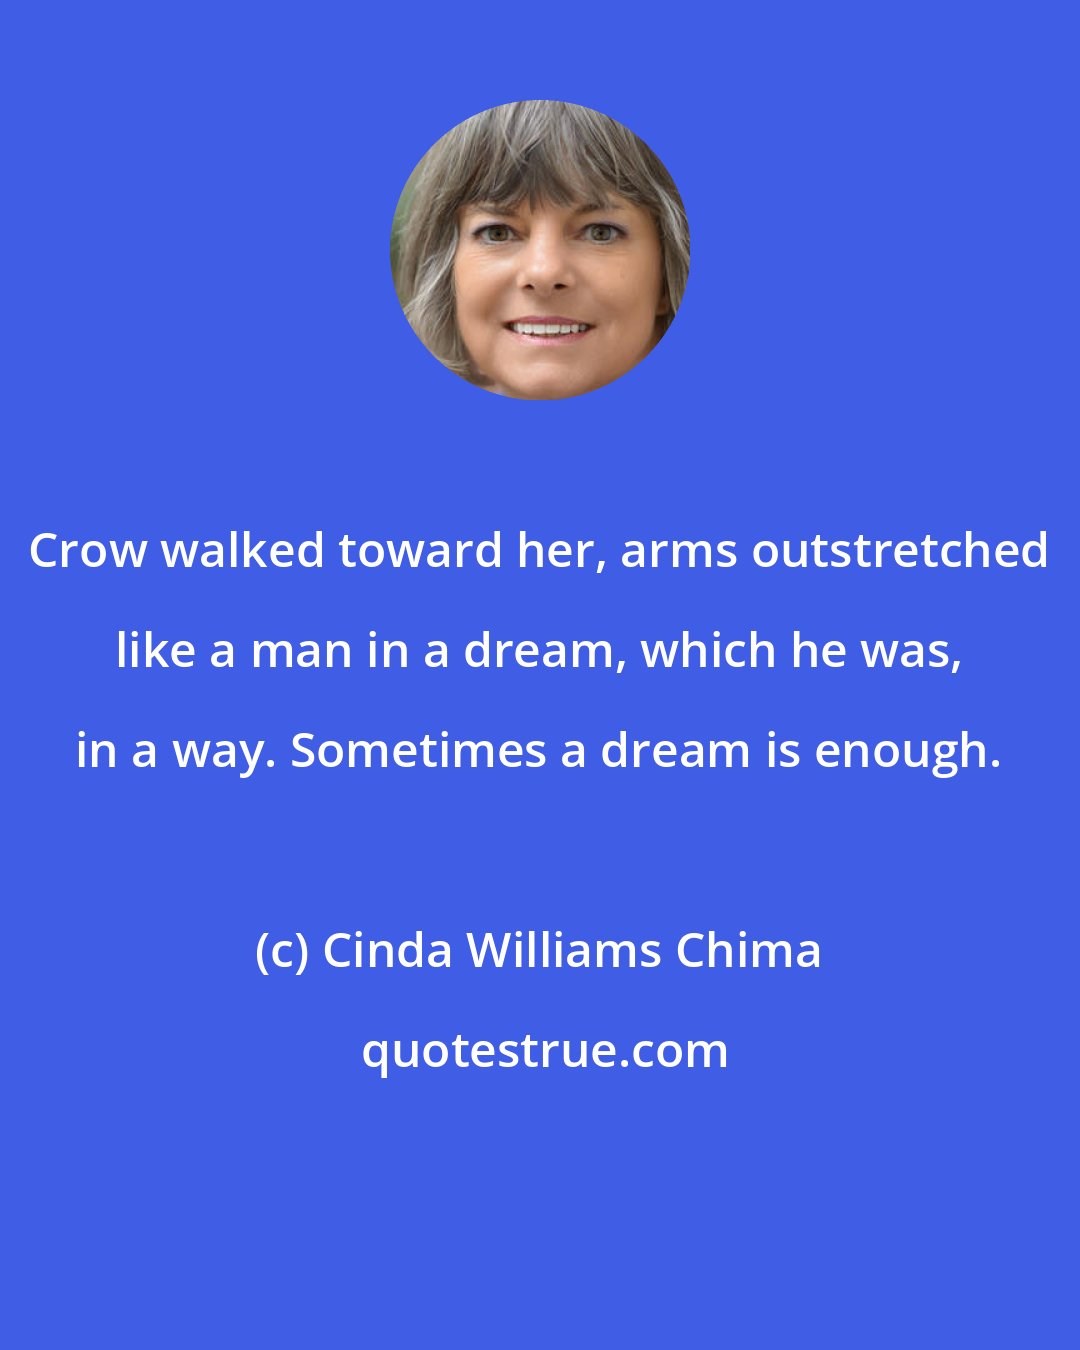 Cinda Williams Chima: Crow walked toward her, arms outstretched like a man in a dream, which he was, in a way. Sometimes a dream is enough.